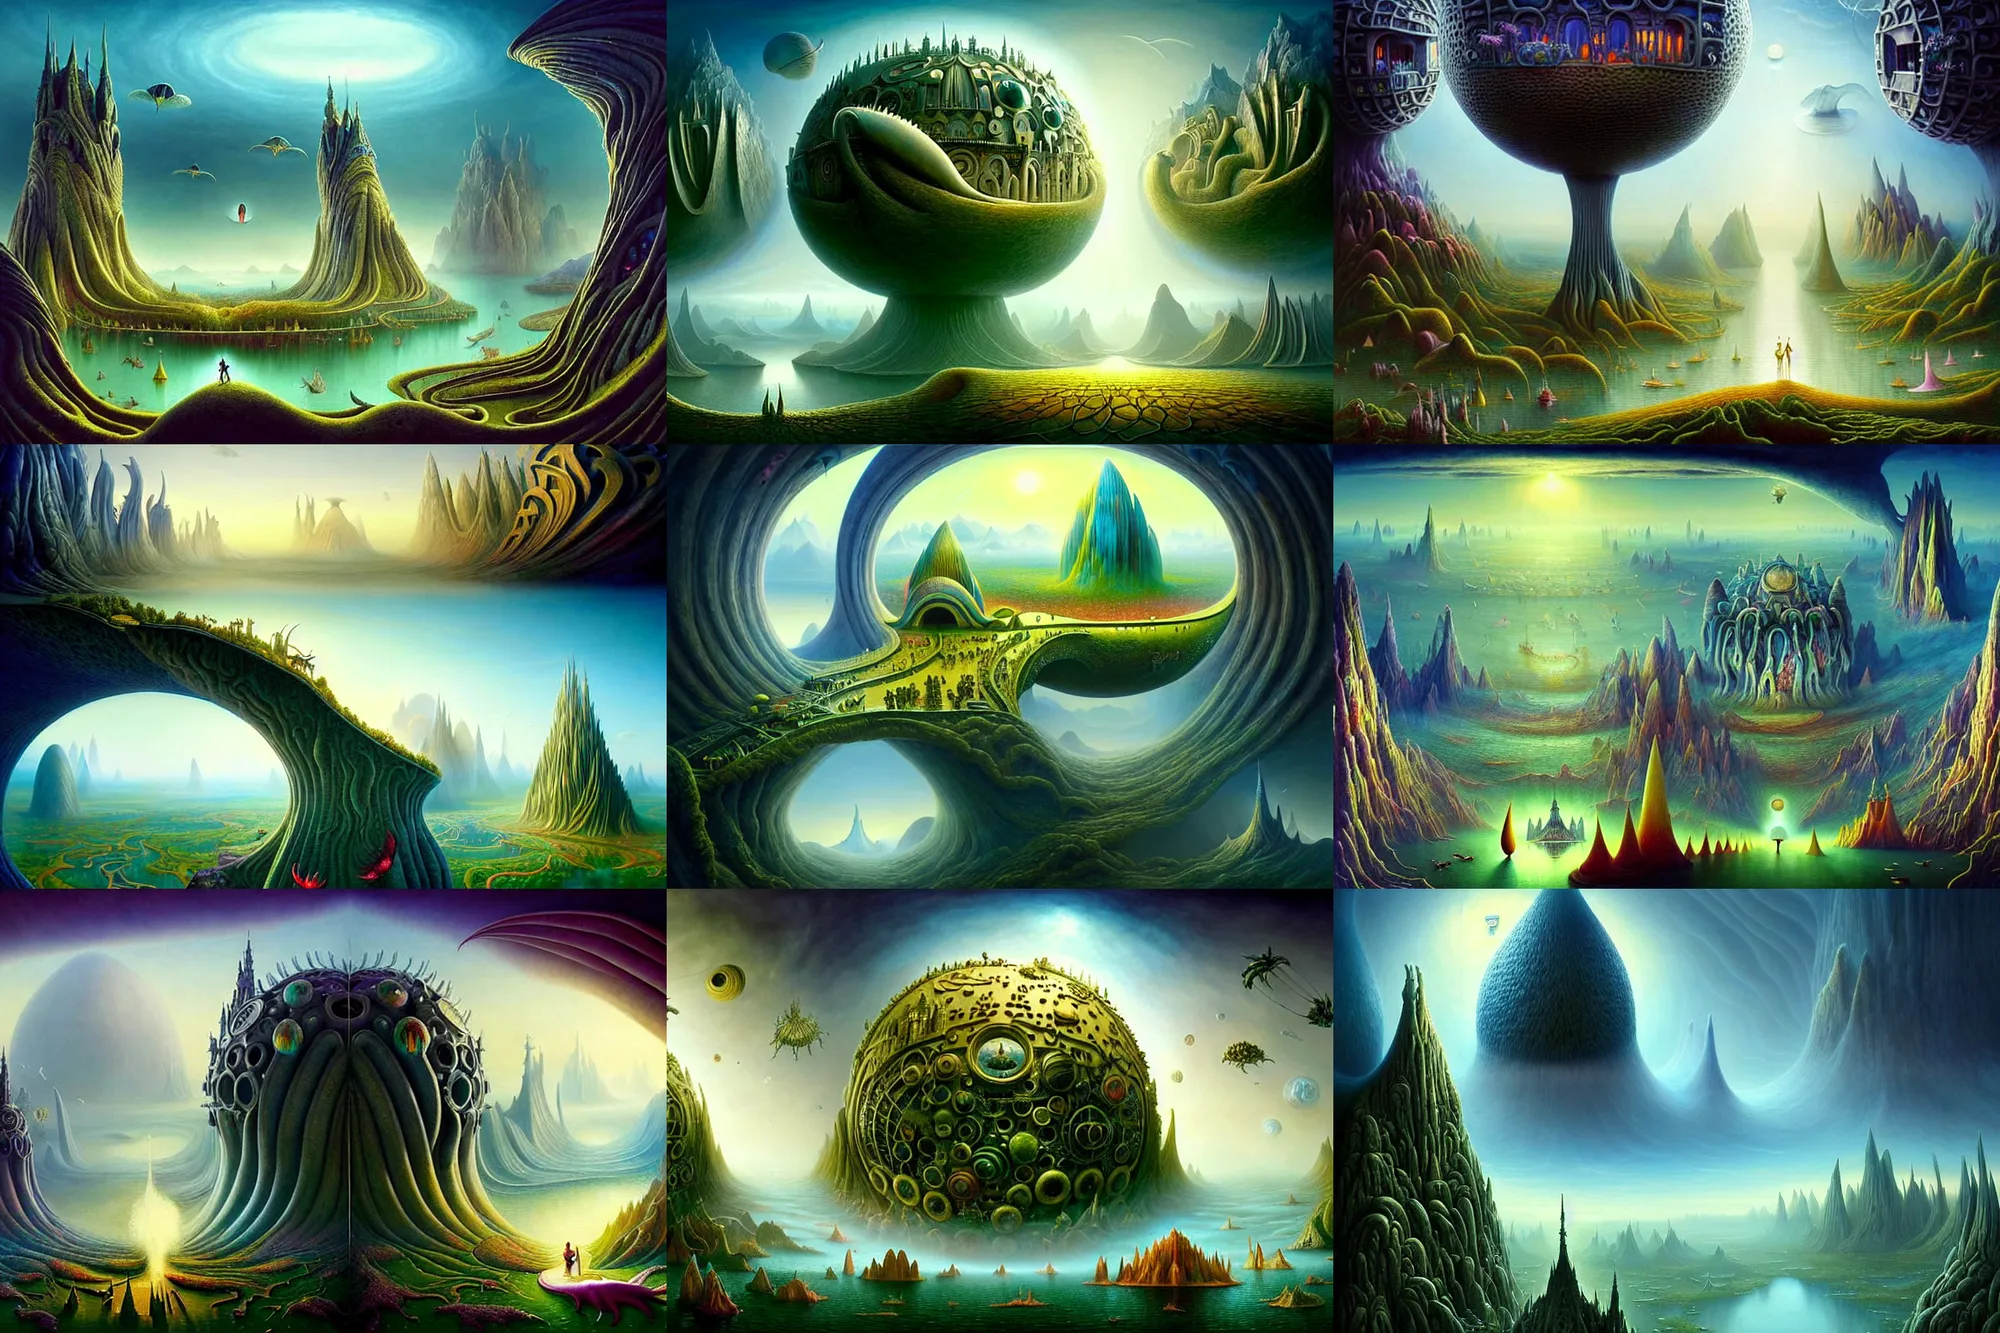 Prompt: a beautiful epic stunning amazing and insanely detailed matte painting of alien dream worlds with surreal architecture designed by Heironymous Bosch, mega structures inspired by Heironymous Bosch's Garden of Earthly Delights, vast surreal landscape and horizon by Cyril Rolando and Andrew Ferez and Thomas Kinkade, masterpiece!!, grand!, imaginative!!!, whimsical!!, epic scale, intricate details, sense of awe, elite, wonder, insanely complex, masterful composition, sharp focus, dramatic lighting